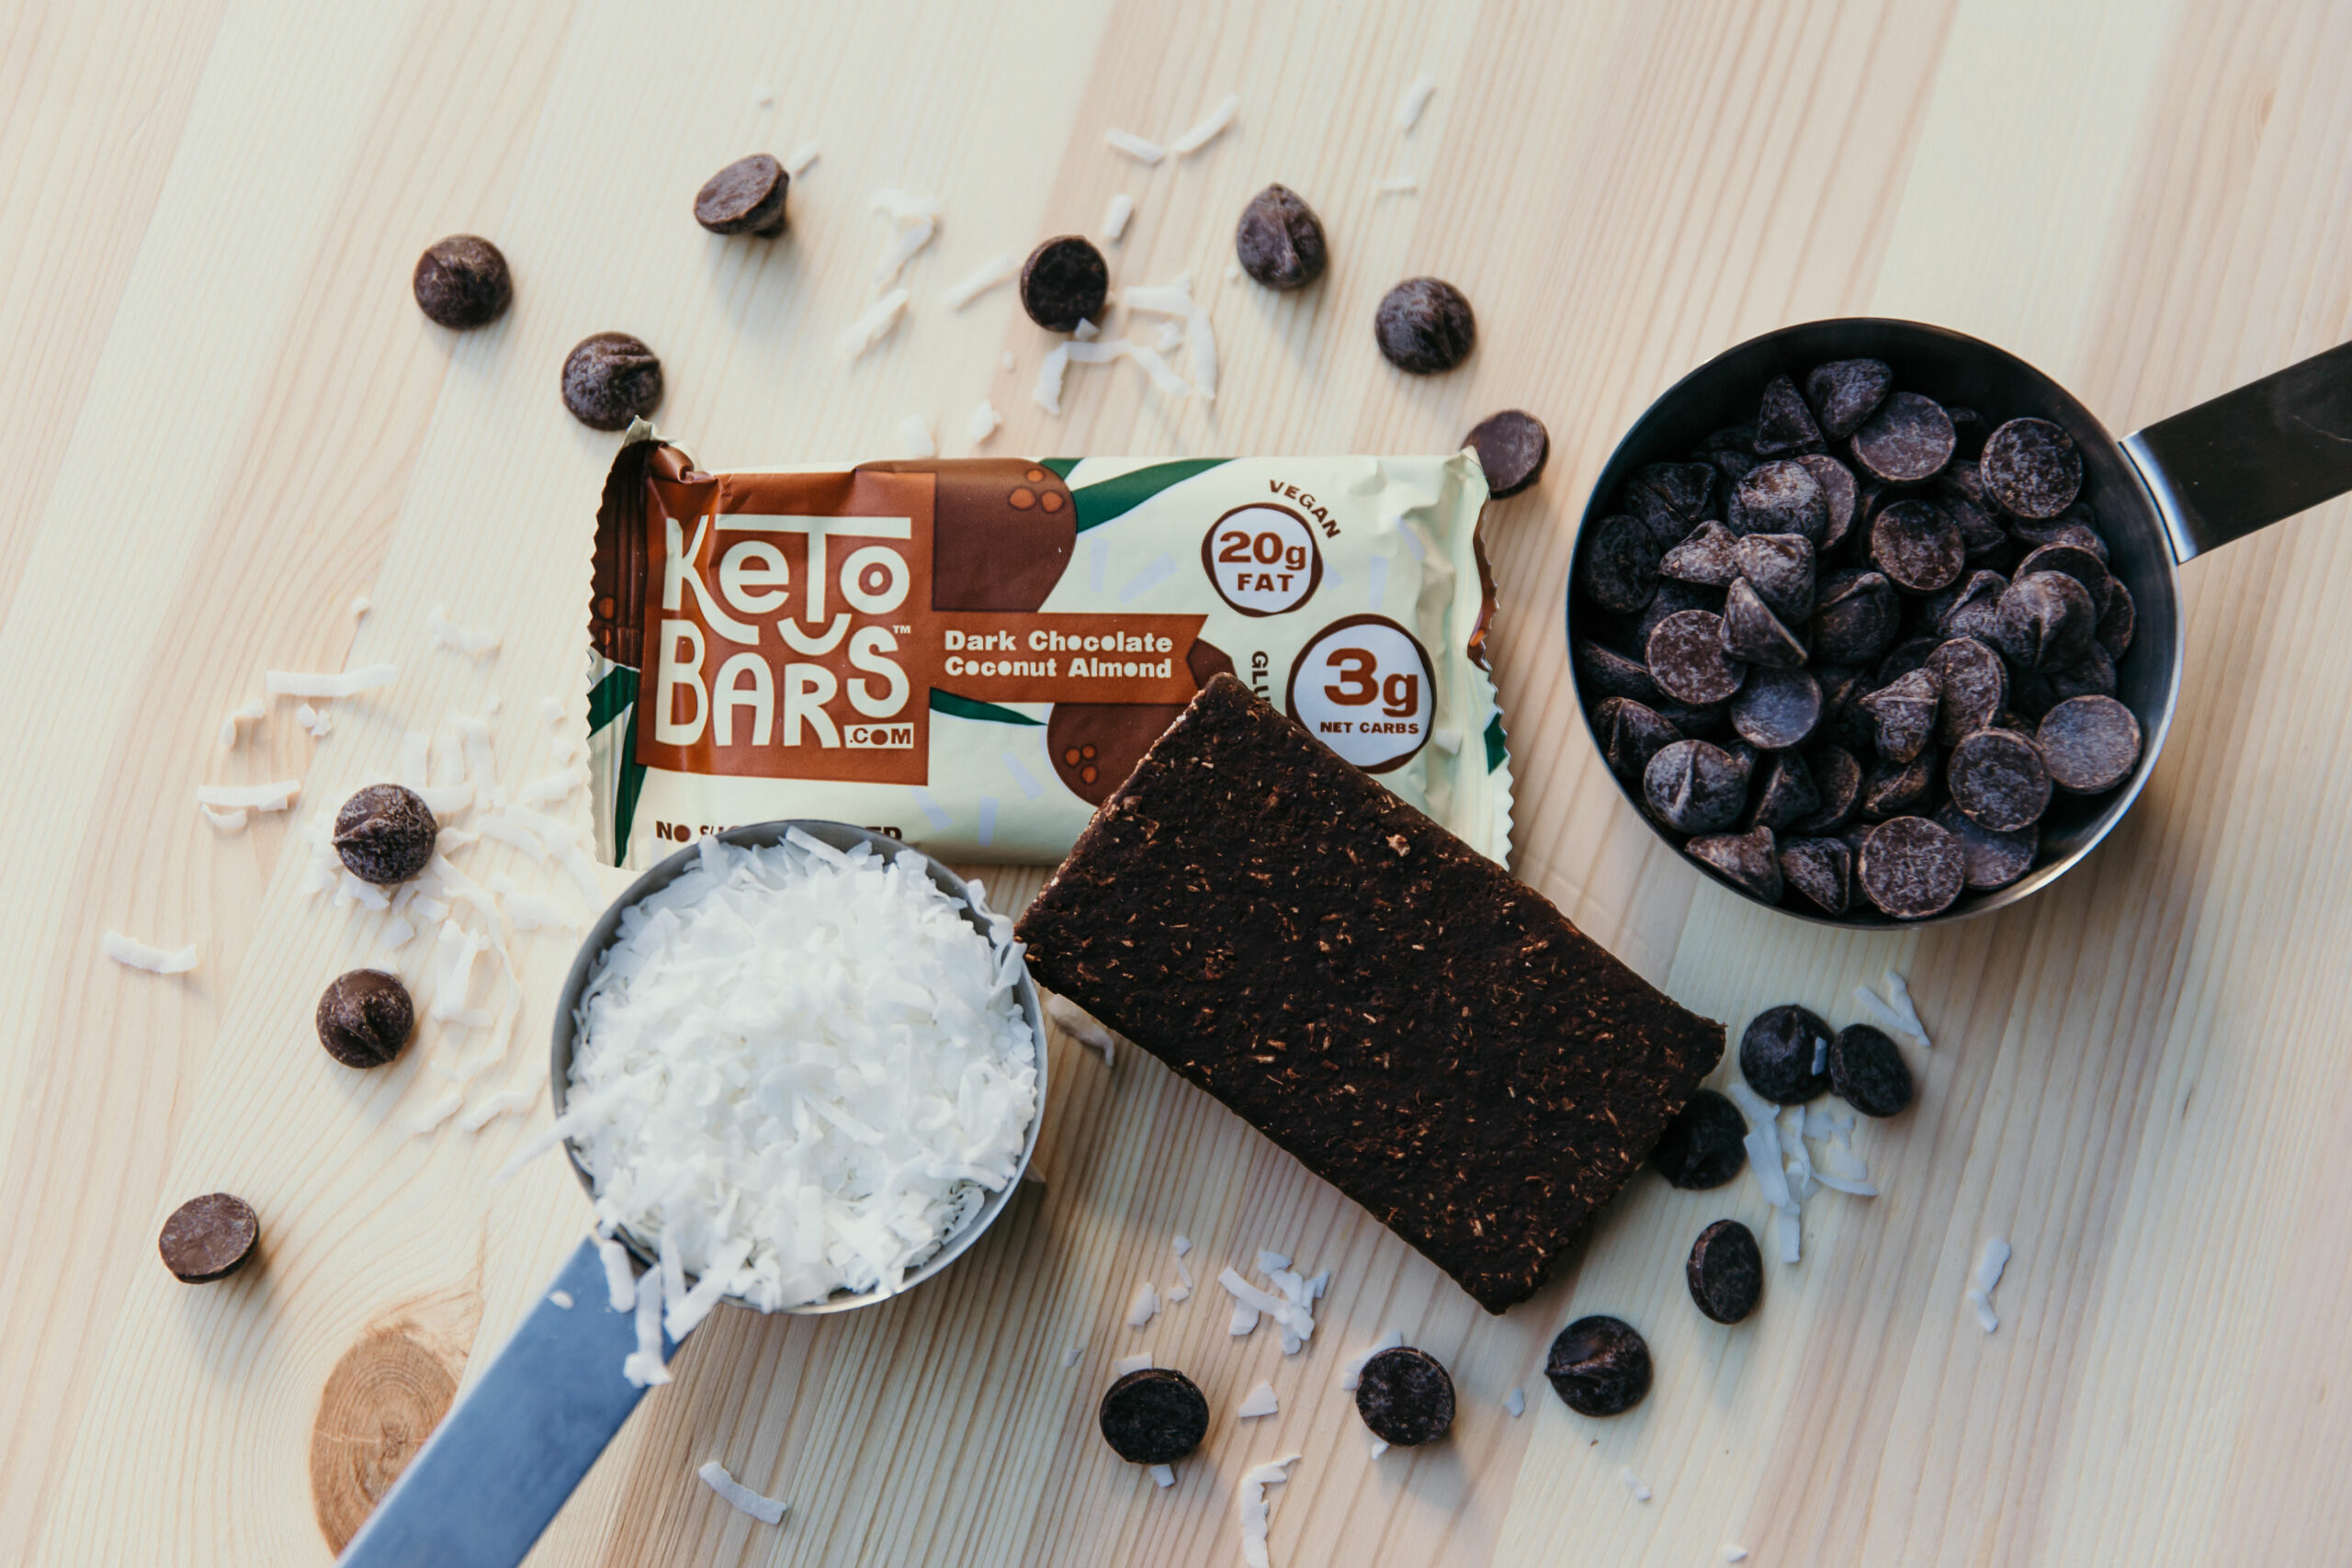 A Keto Bar next to a cup of chocolate chips and shredded coconut